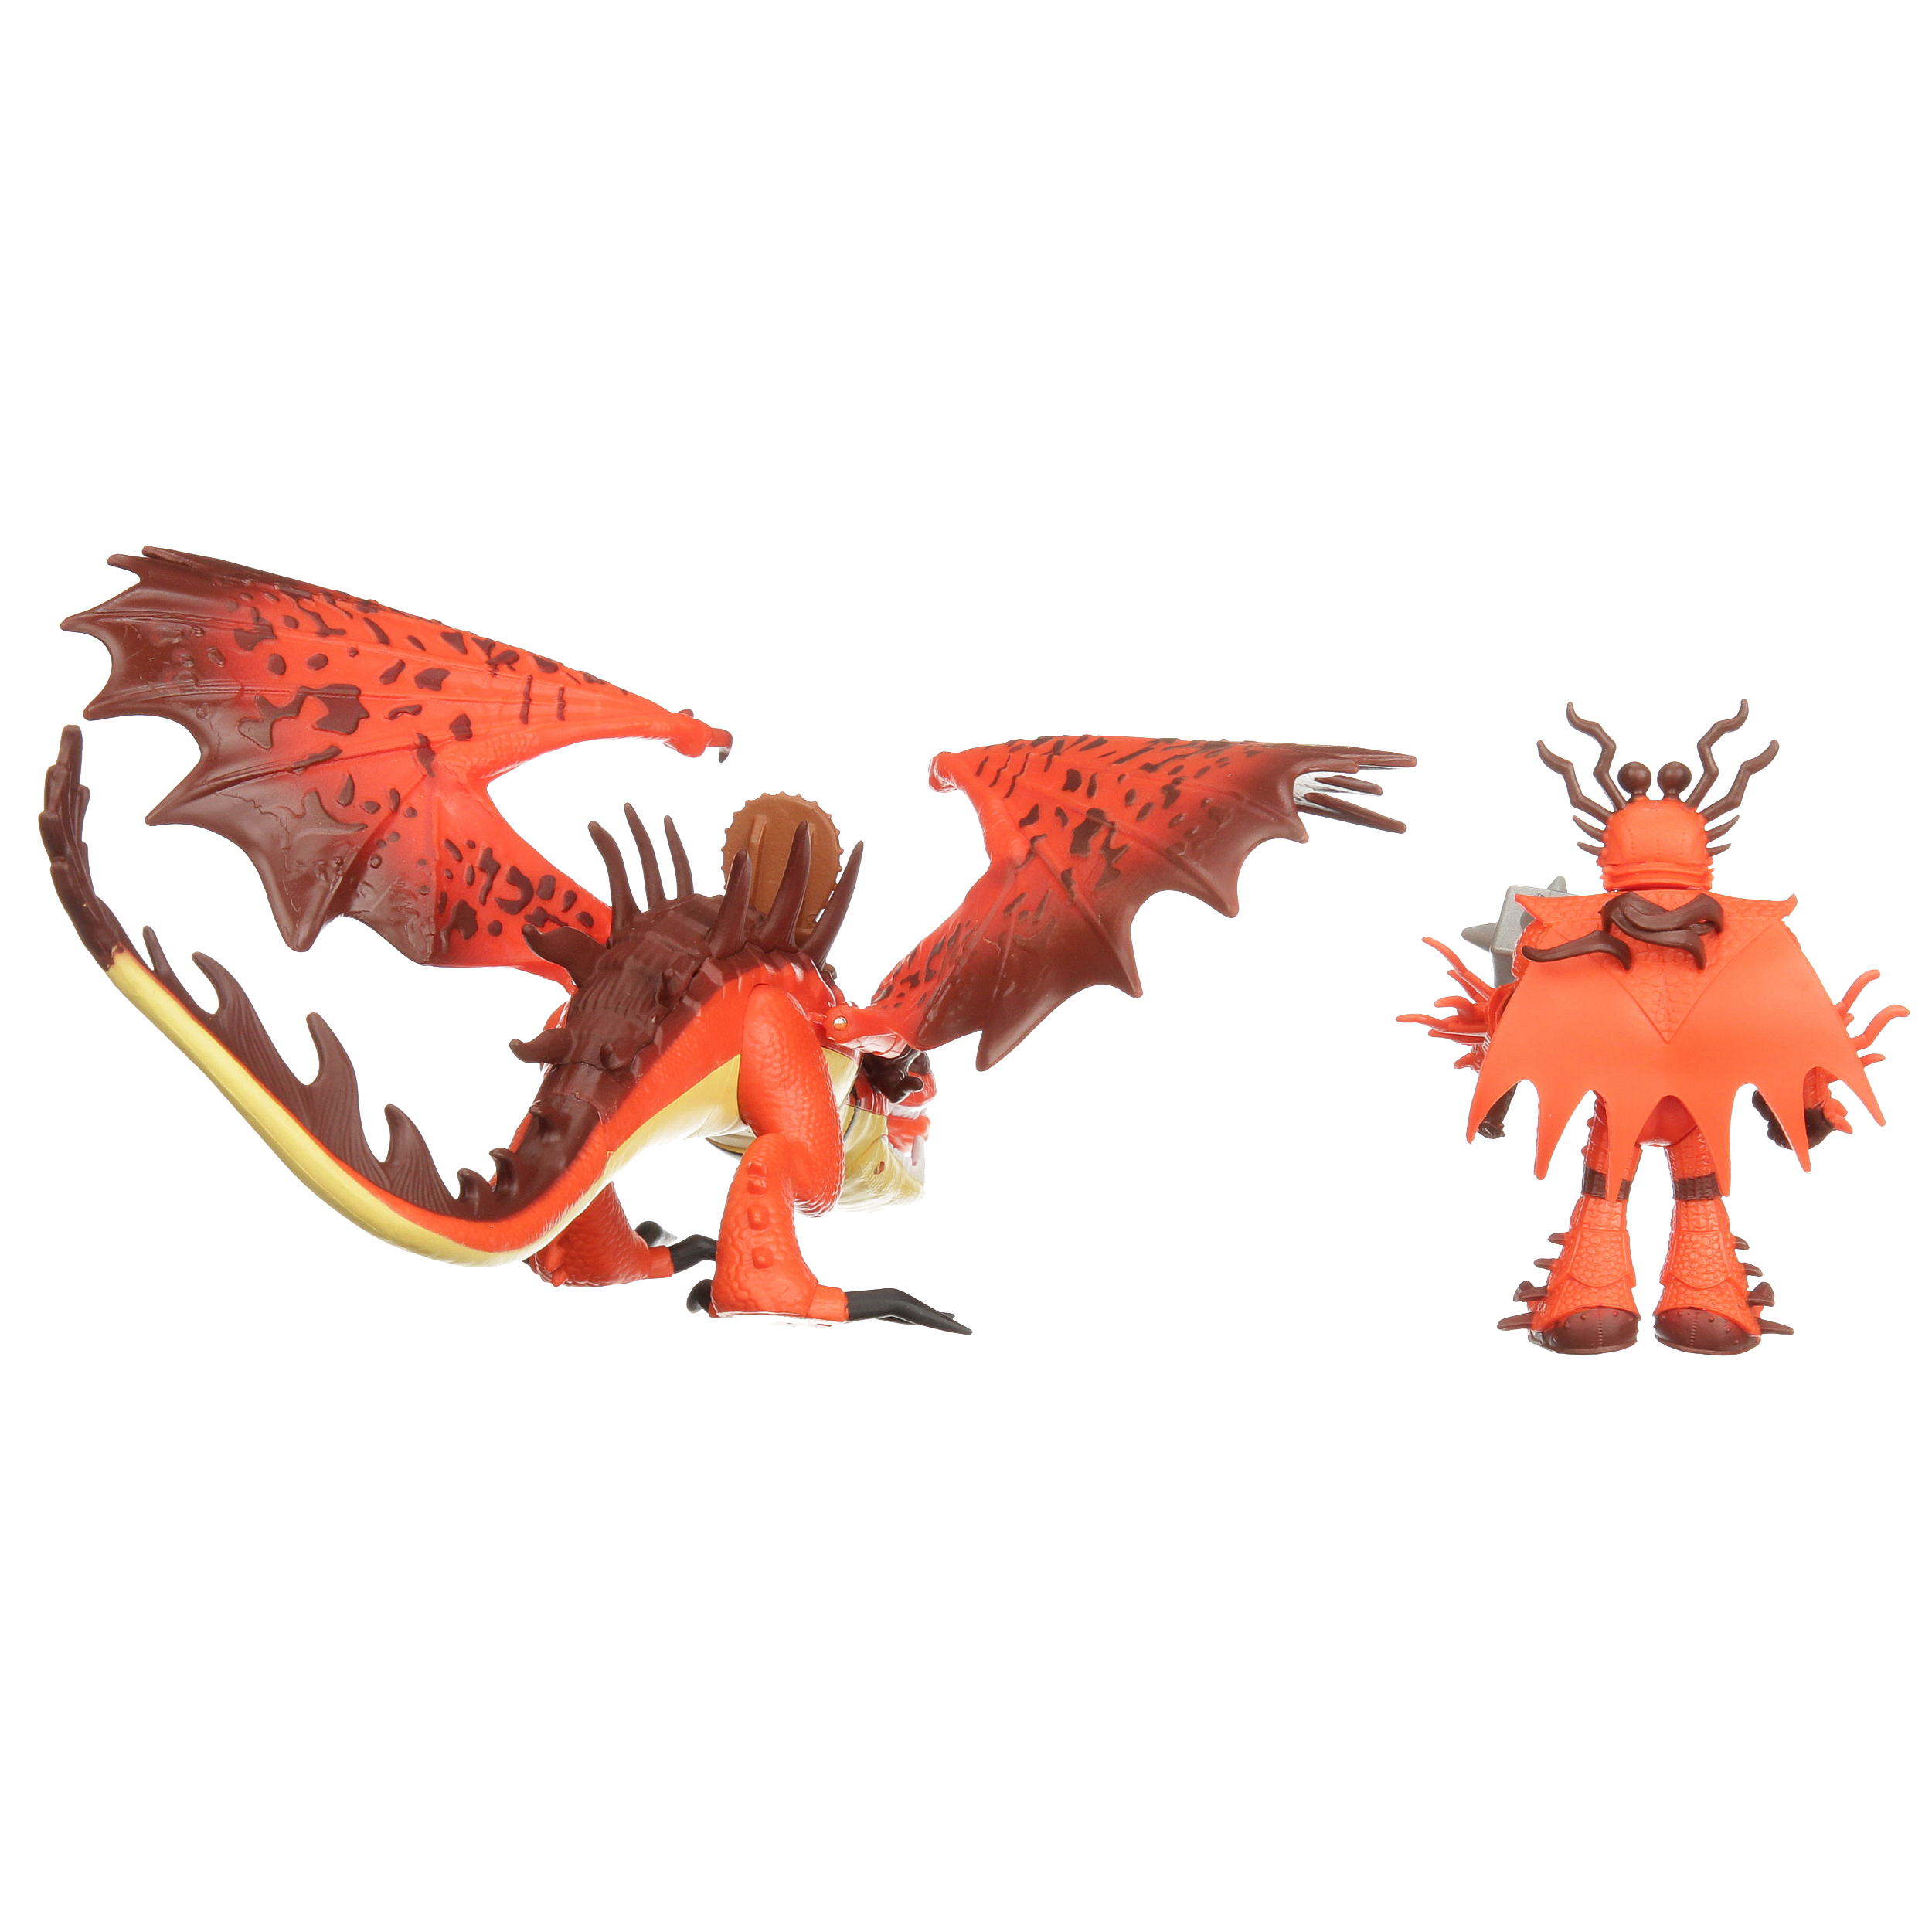 DreamWorks Dragons, Hookfang and Snotlout, Dragon with Armored Viking Figure, for Kids Aged 4 and Up - image 7 of 7